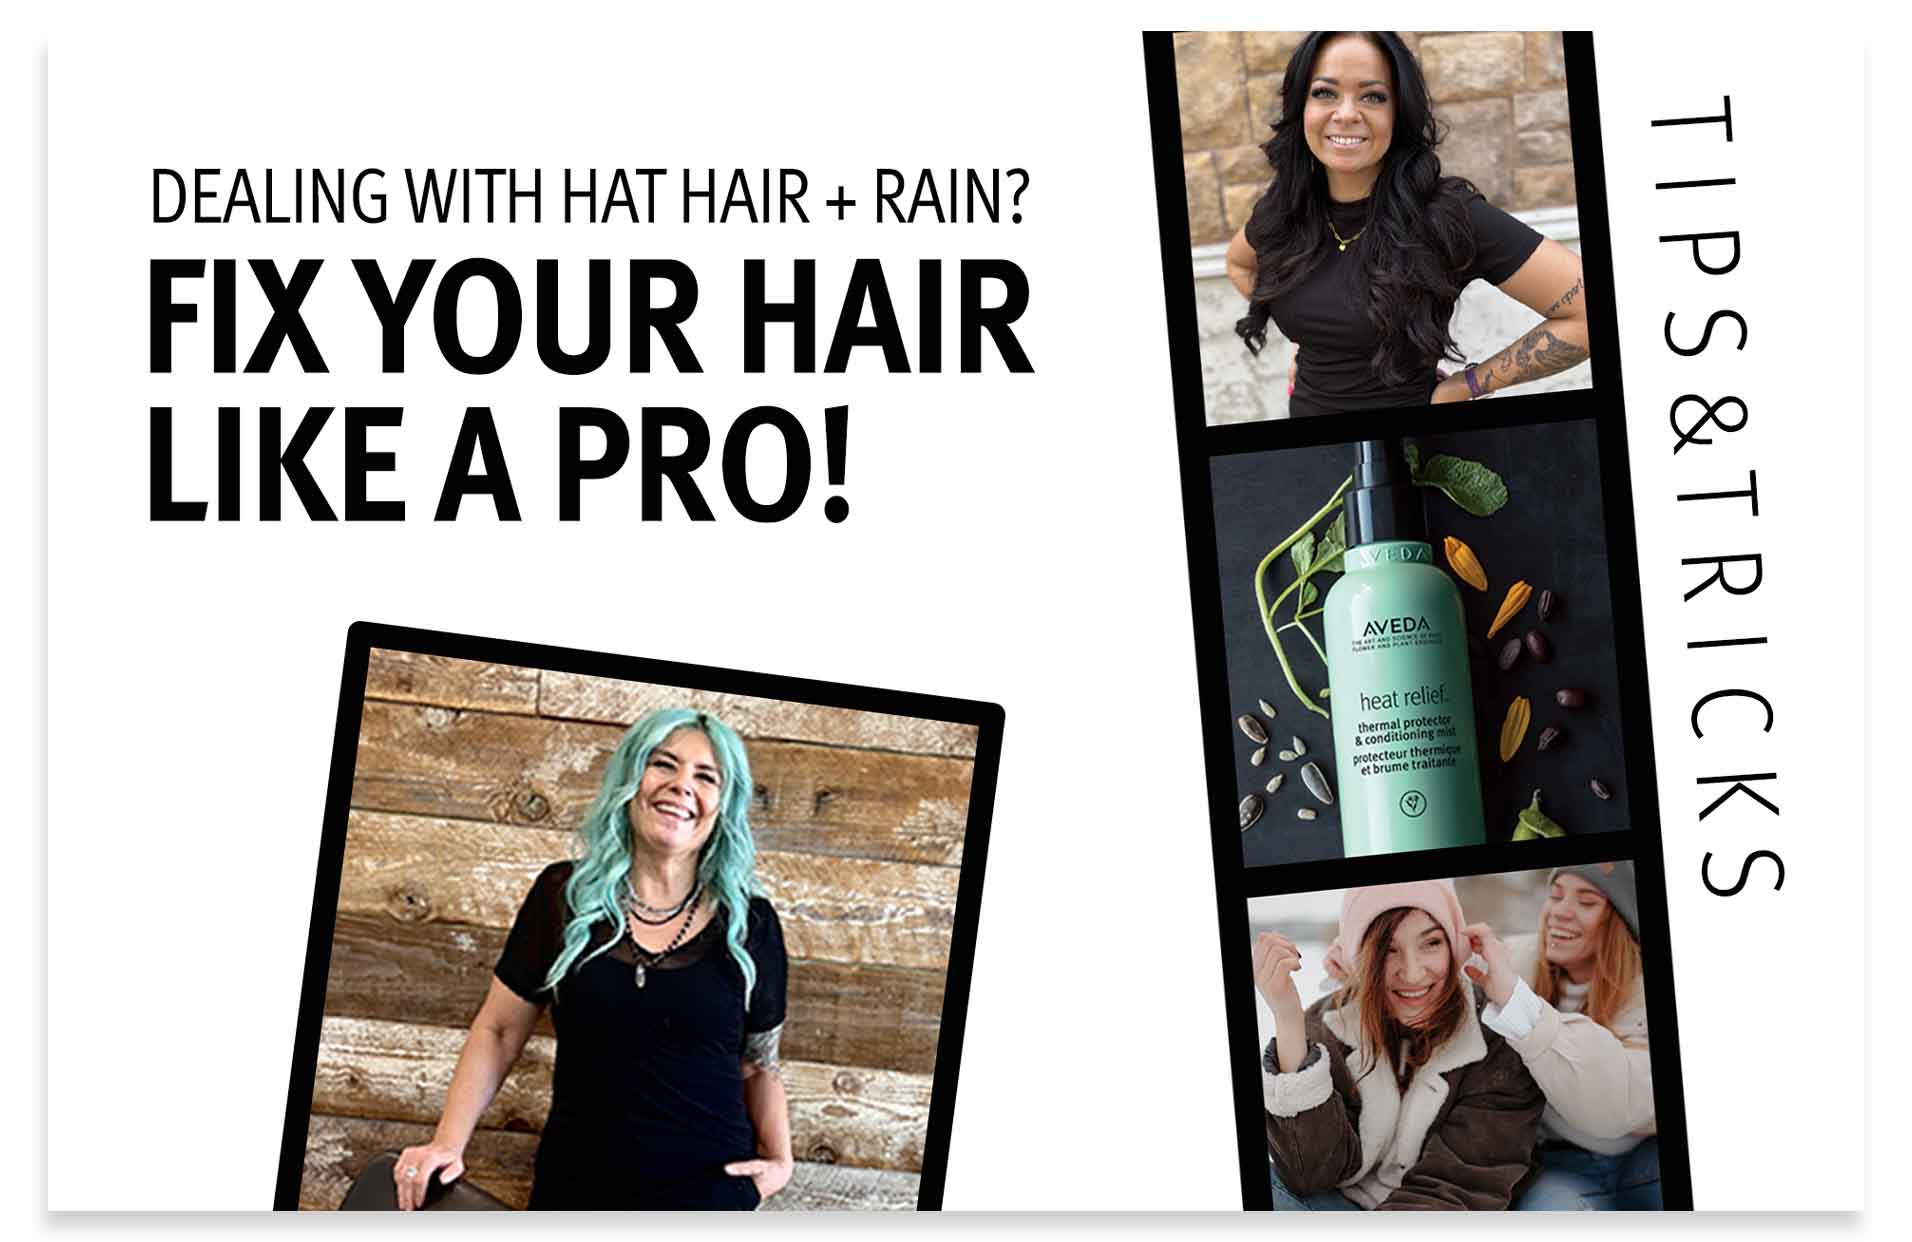 Dosha blog - How to extend good hair days in the PNW